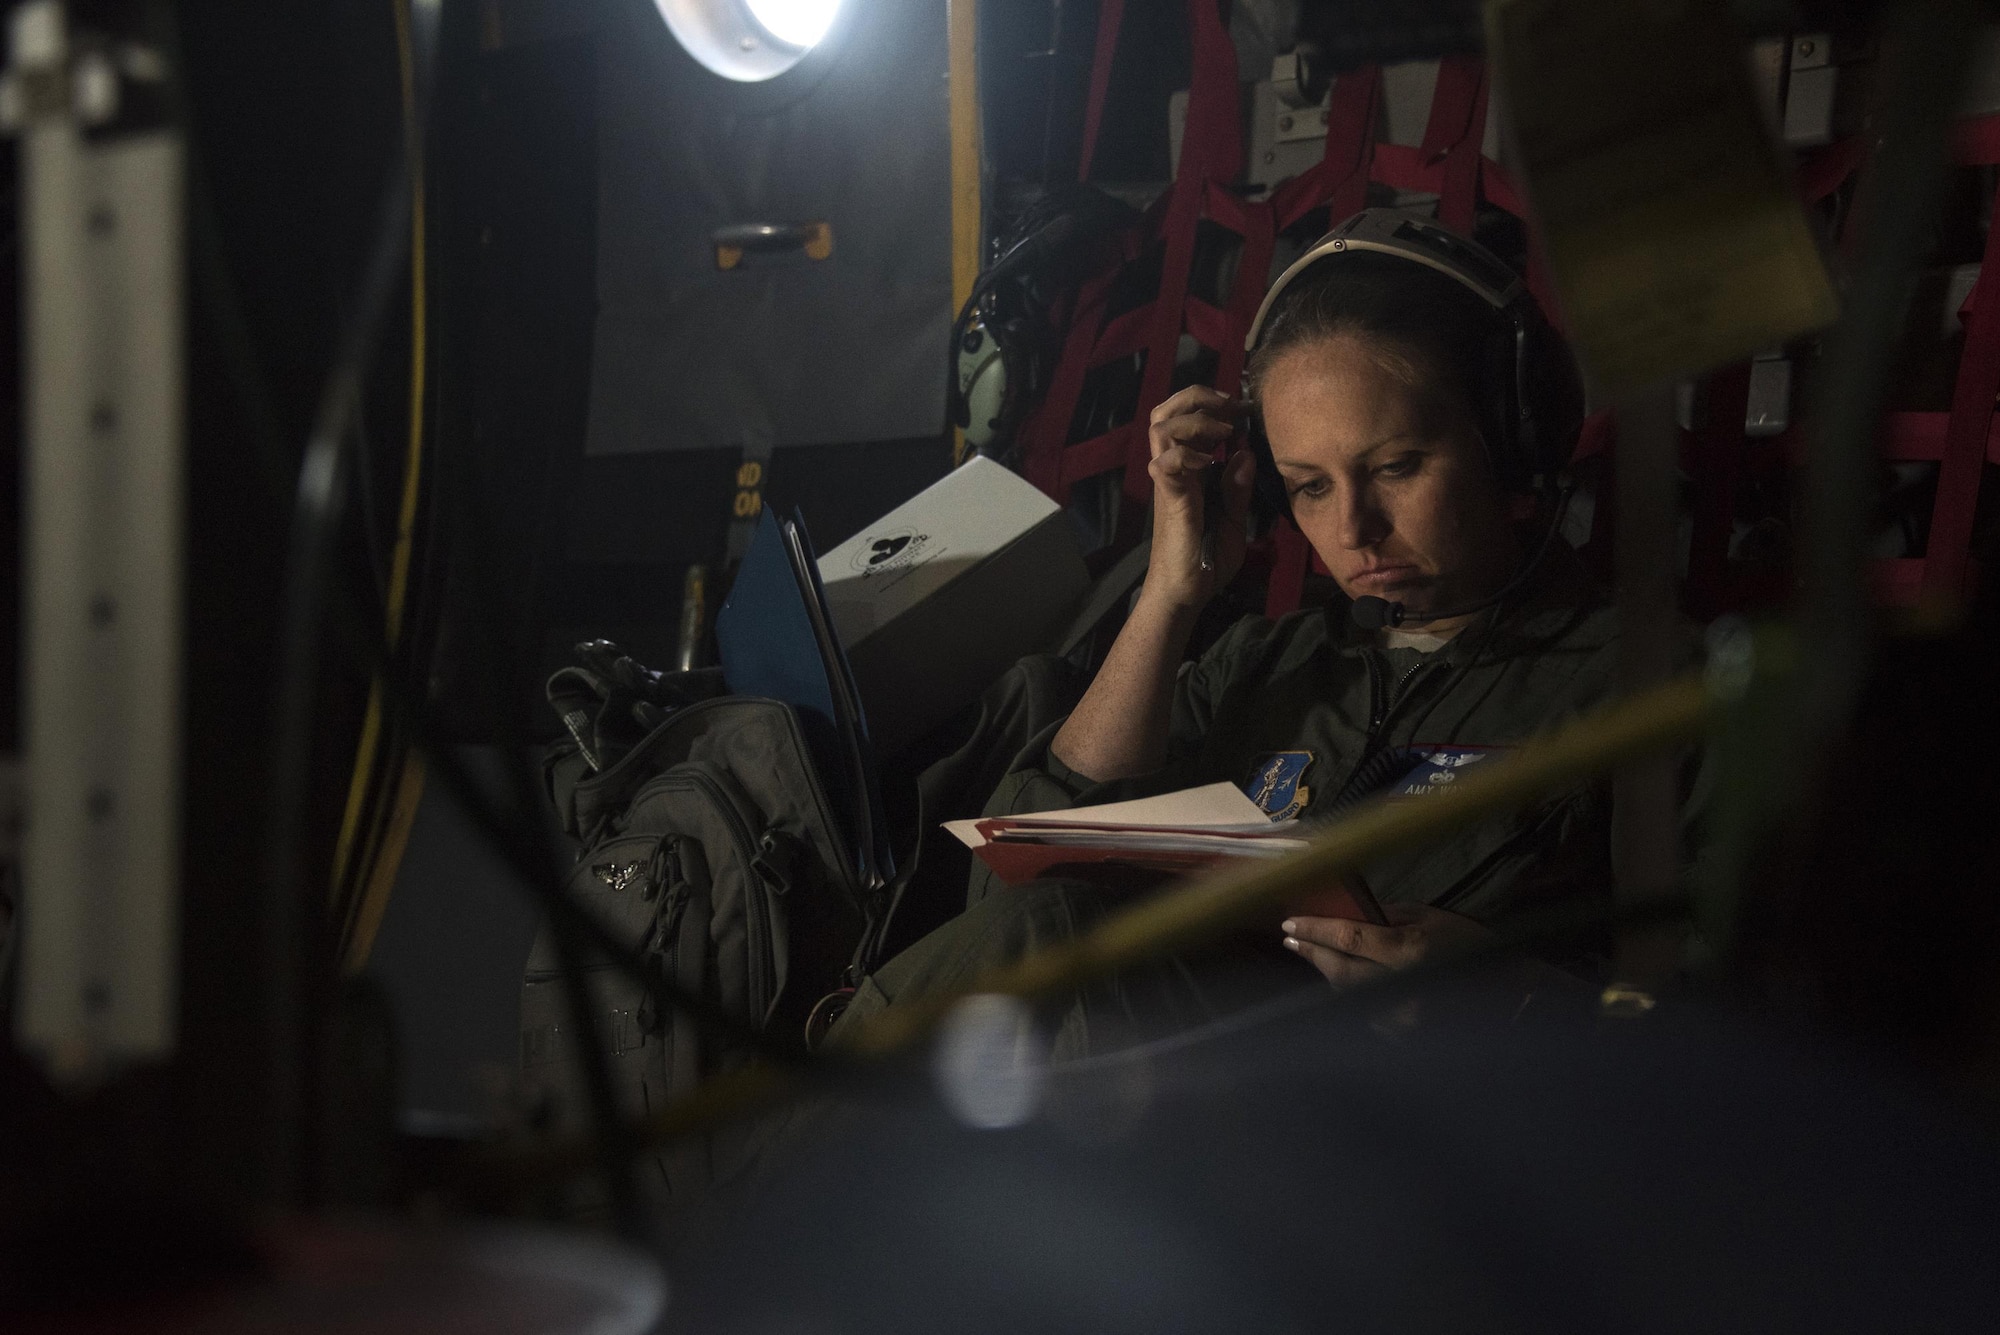 Capt. Amanda Wey, a flight nurse from the 183rd Aeromedical Evacuation Squadron, Mississippi Air National Guard, scans through checklists during a simulated flight on a static C-130 Hercules trainer at Will Rogers Air National Guard Base, April 7, 2017. The flight was part of the Multiple Aircraft Training Opportunity Program, or MATOP, that brought eight of the nine Air National Guard aeromedical evacuation squadrons and the three aircraft they most commonly fly on to one place for realistic and comprehensive training, April 6-9, 2017. (U.S. Air National Guard photo by Staff Sgt. Kasey Phipps)